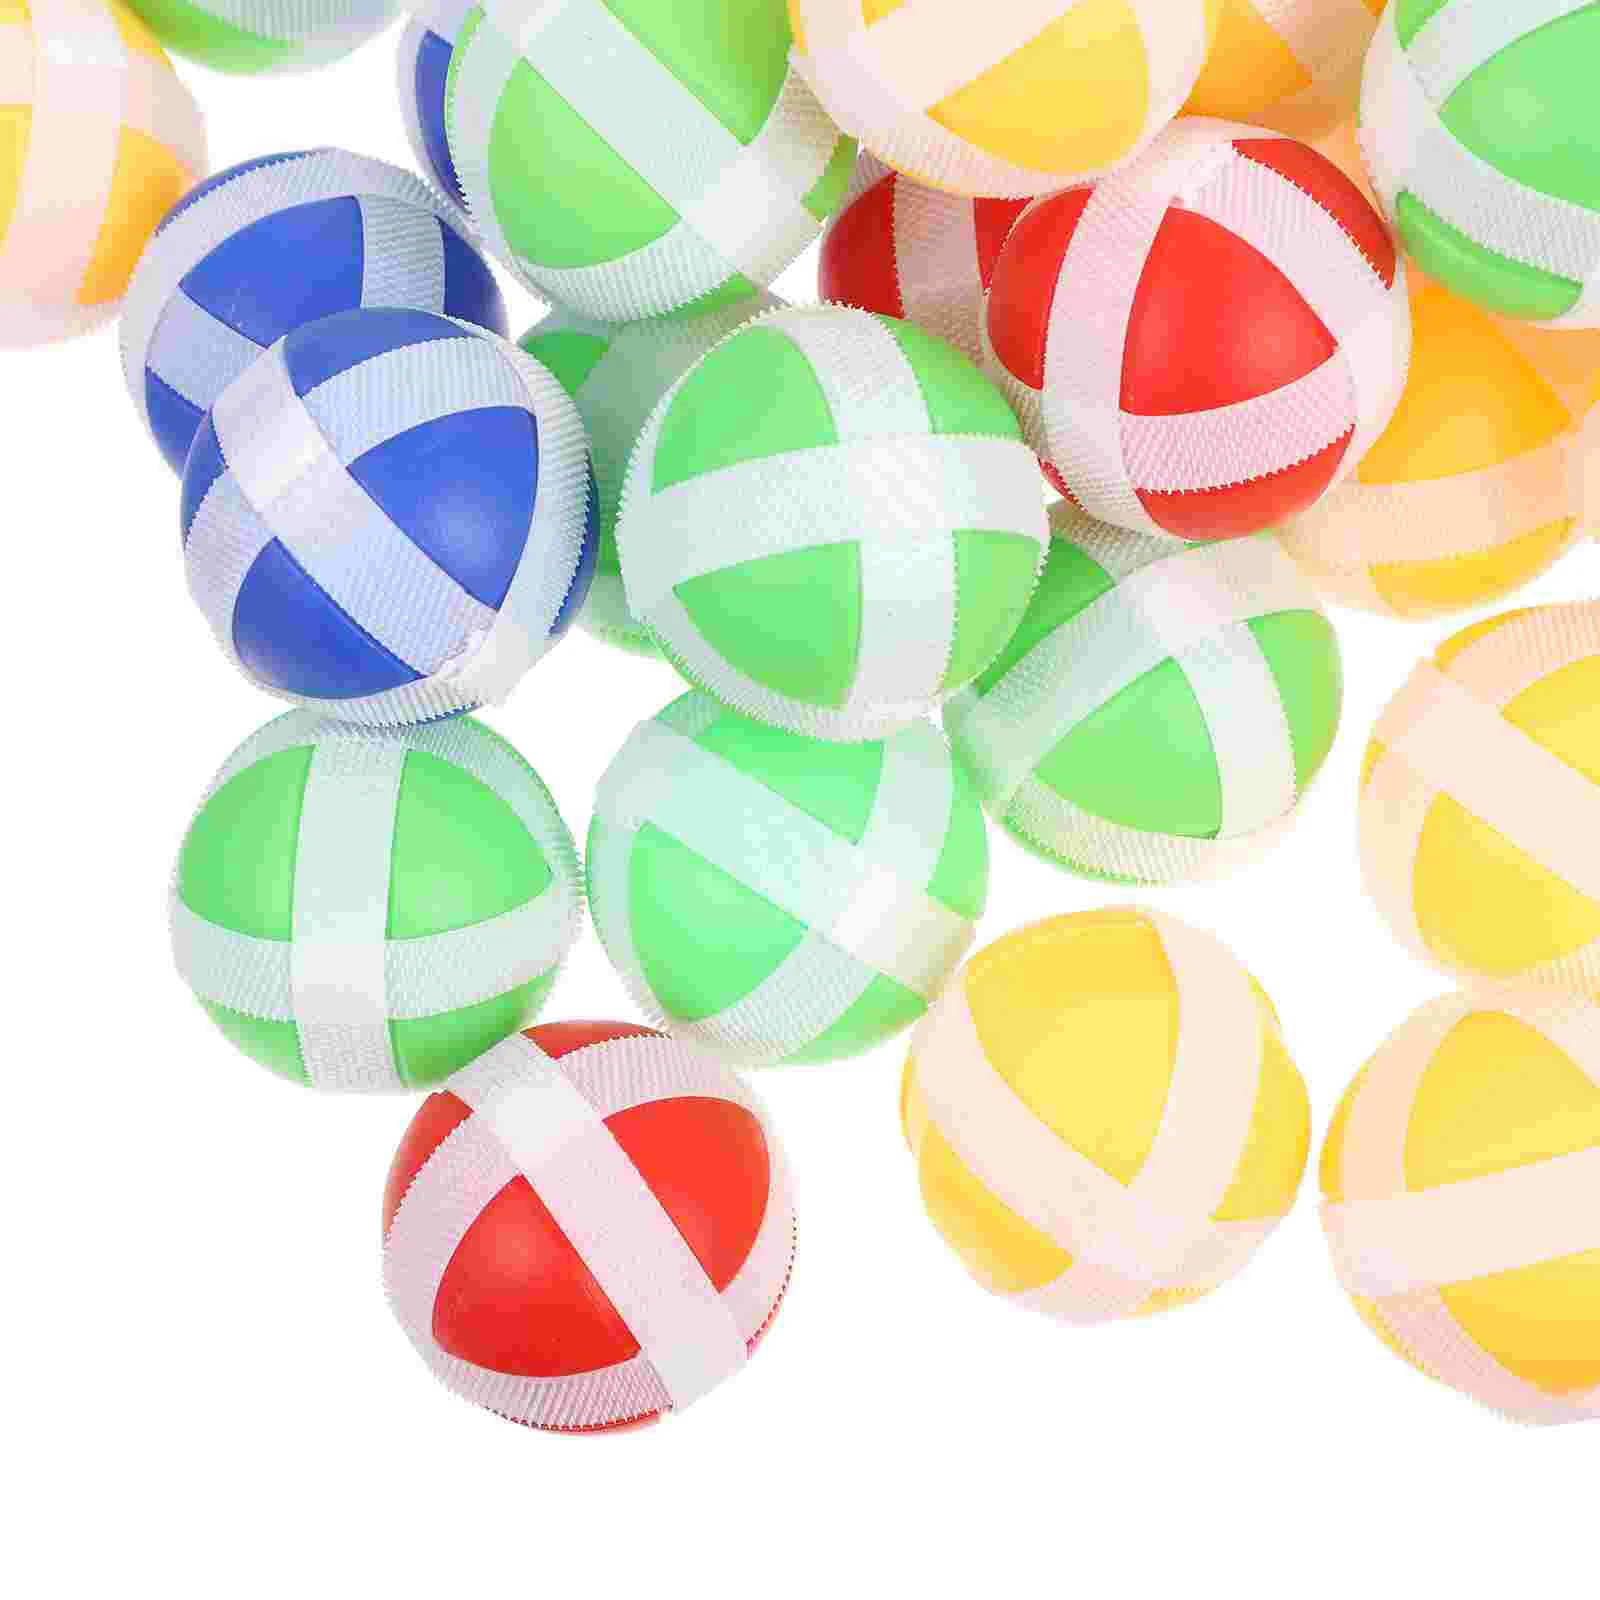 

50 Pcs Sticky Ball Toy Throwing Boys' Accessories Creative Playing Wall Toys Family Game Hook Loop Balls Sucker Colored